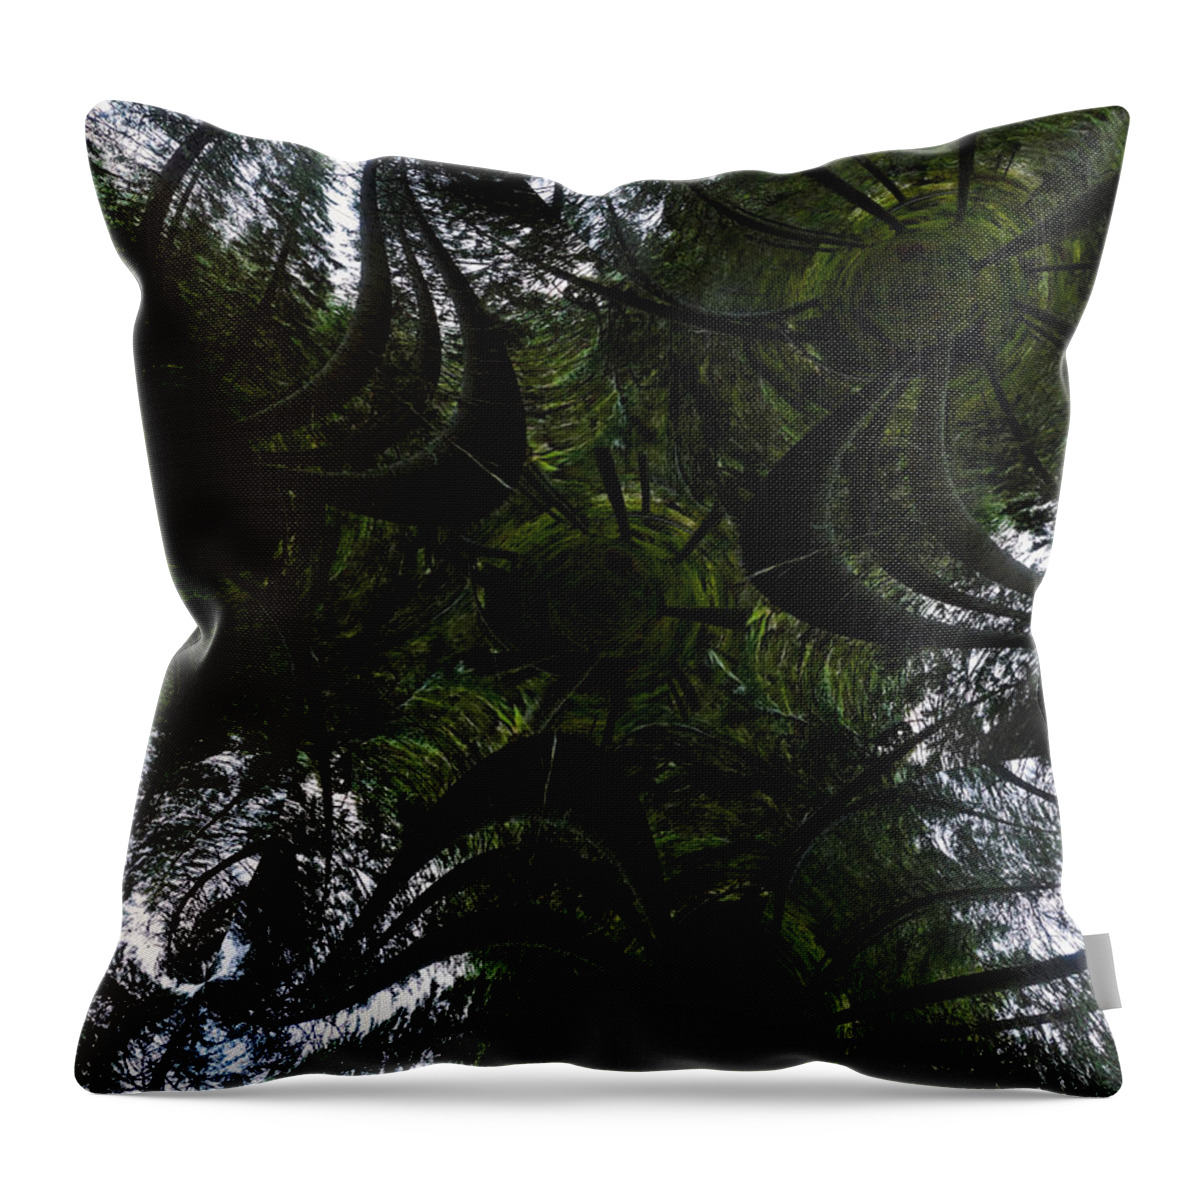 Finland Throw Pillow featuring the photograph Digital Jungle by Jouko Lehto